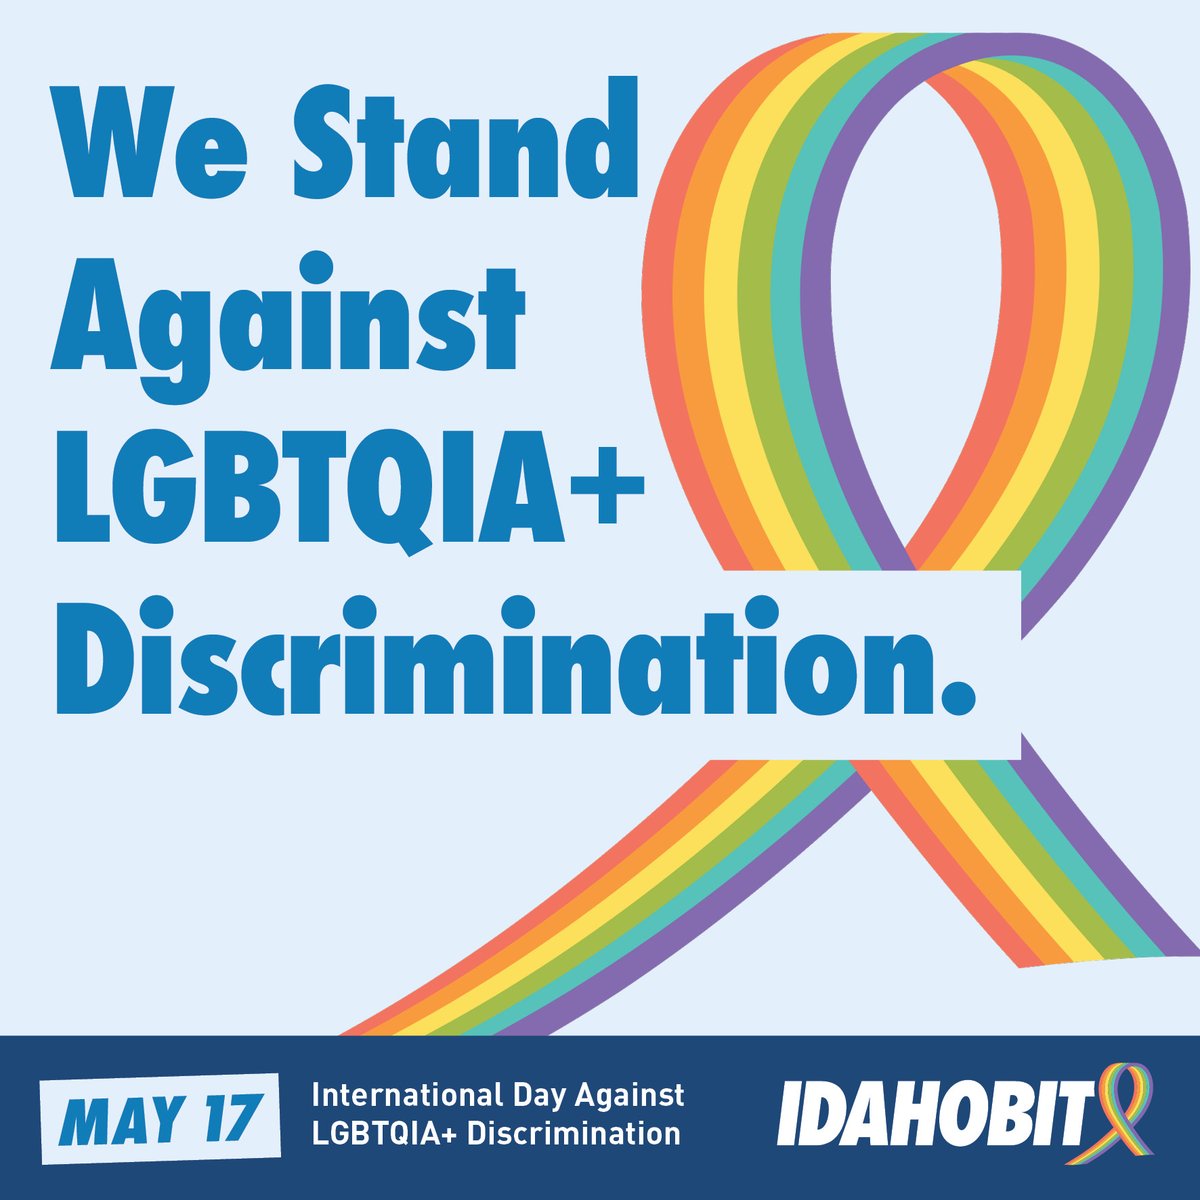 On May 17th, we observe IDAHOBIT - the International Day Against Homophobia, Biphobia, and Transphobia. This day serves as a reminder of the ongoing fight for safe, affirming, and culturally appropriate care for all LGBTIQ+ communities. Find out more: pulse.ly/htft4alzjk.